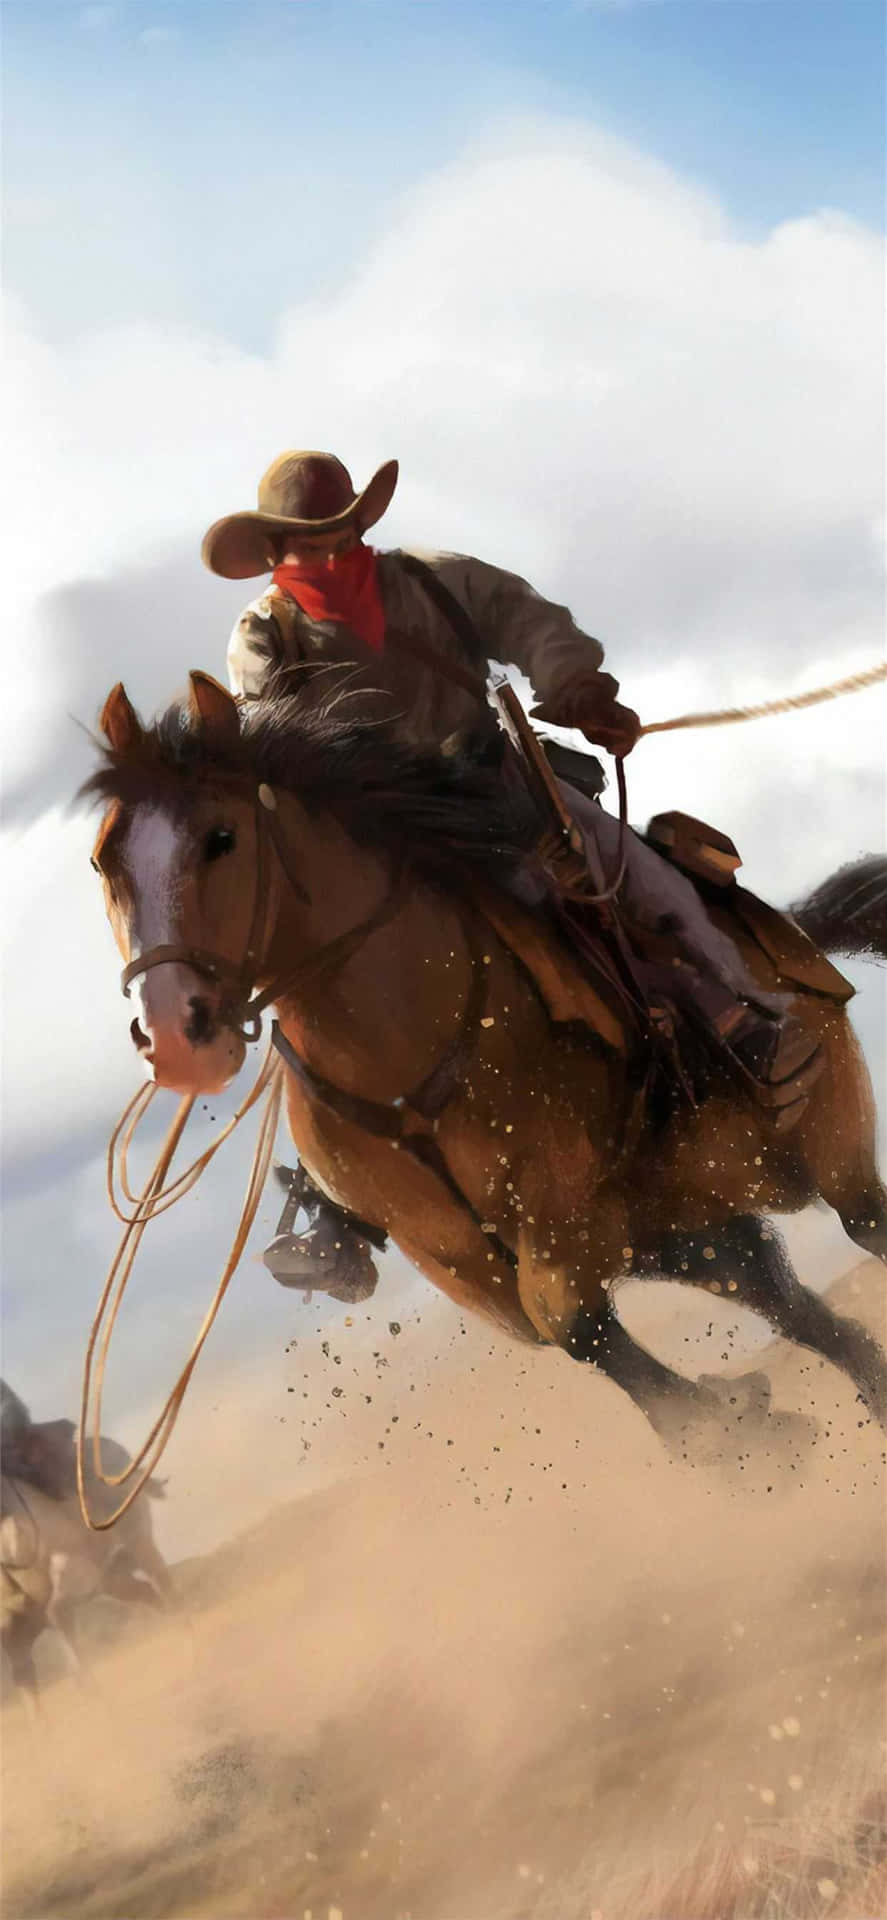 Go West With Cowboy Iphone Wallpaper